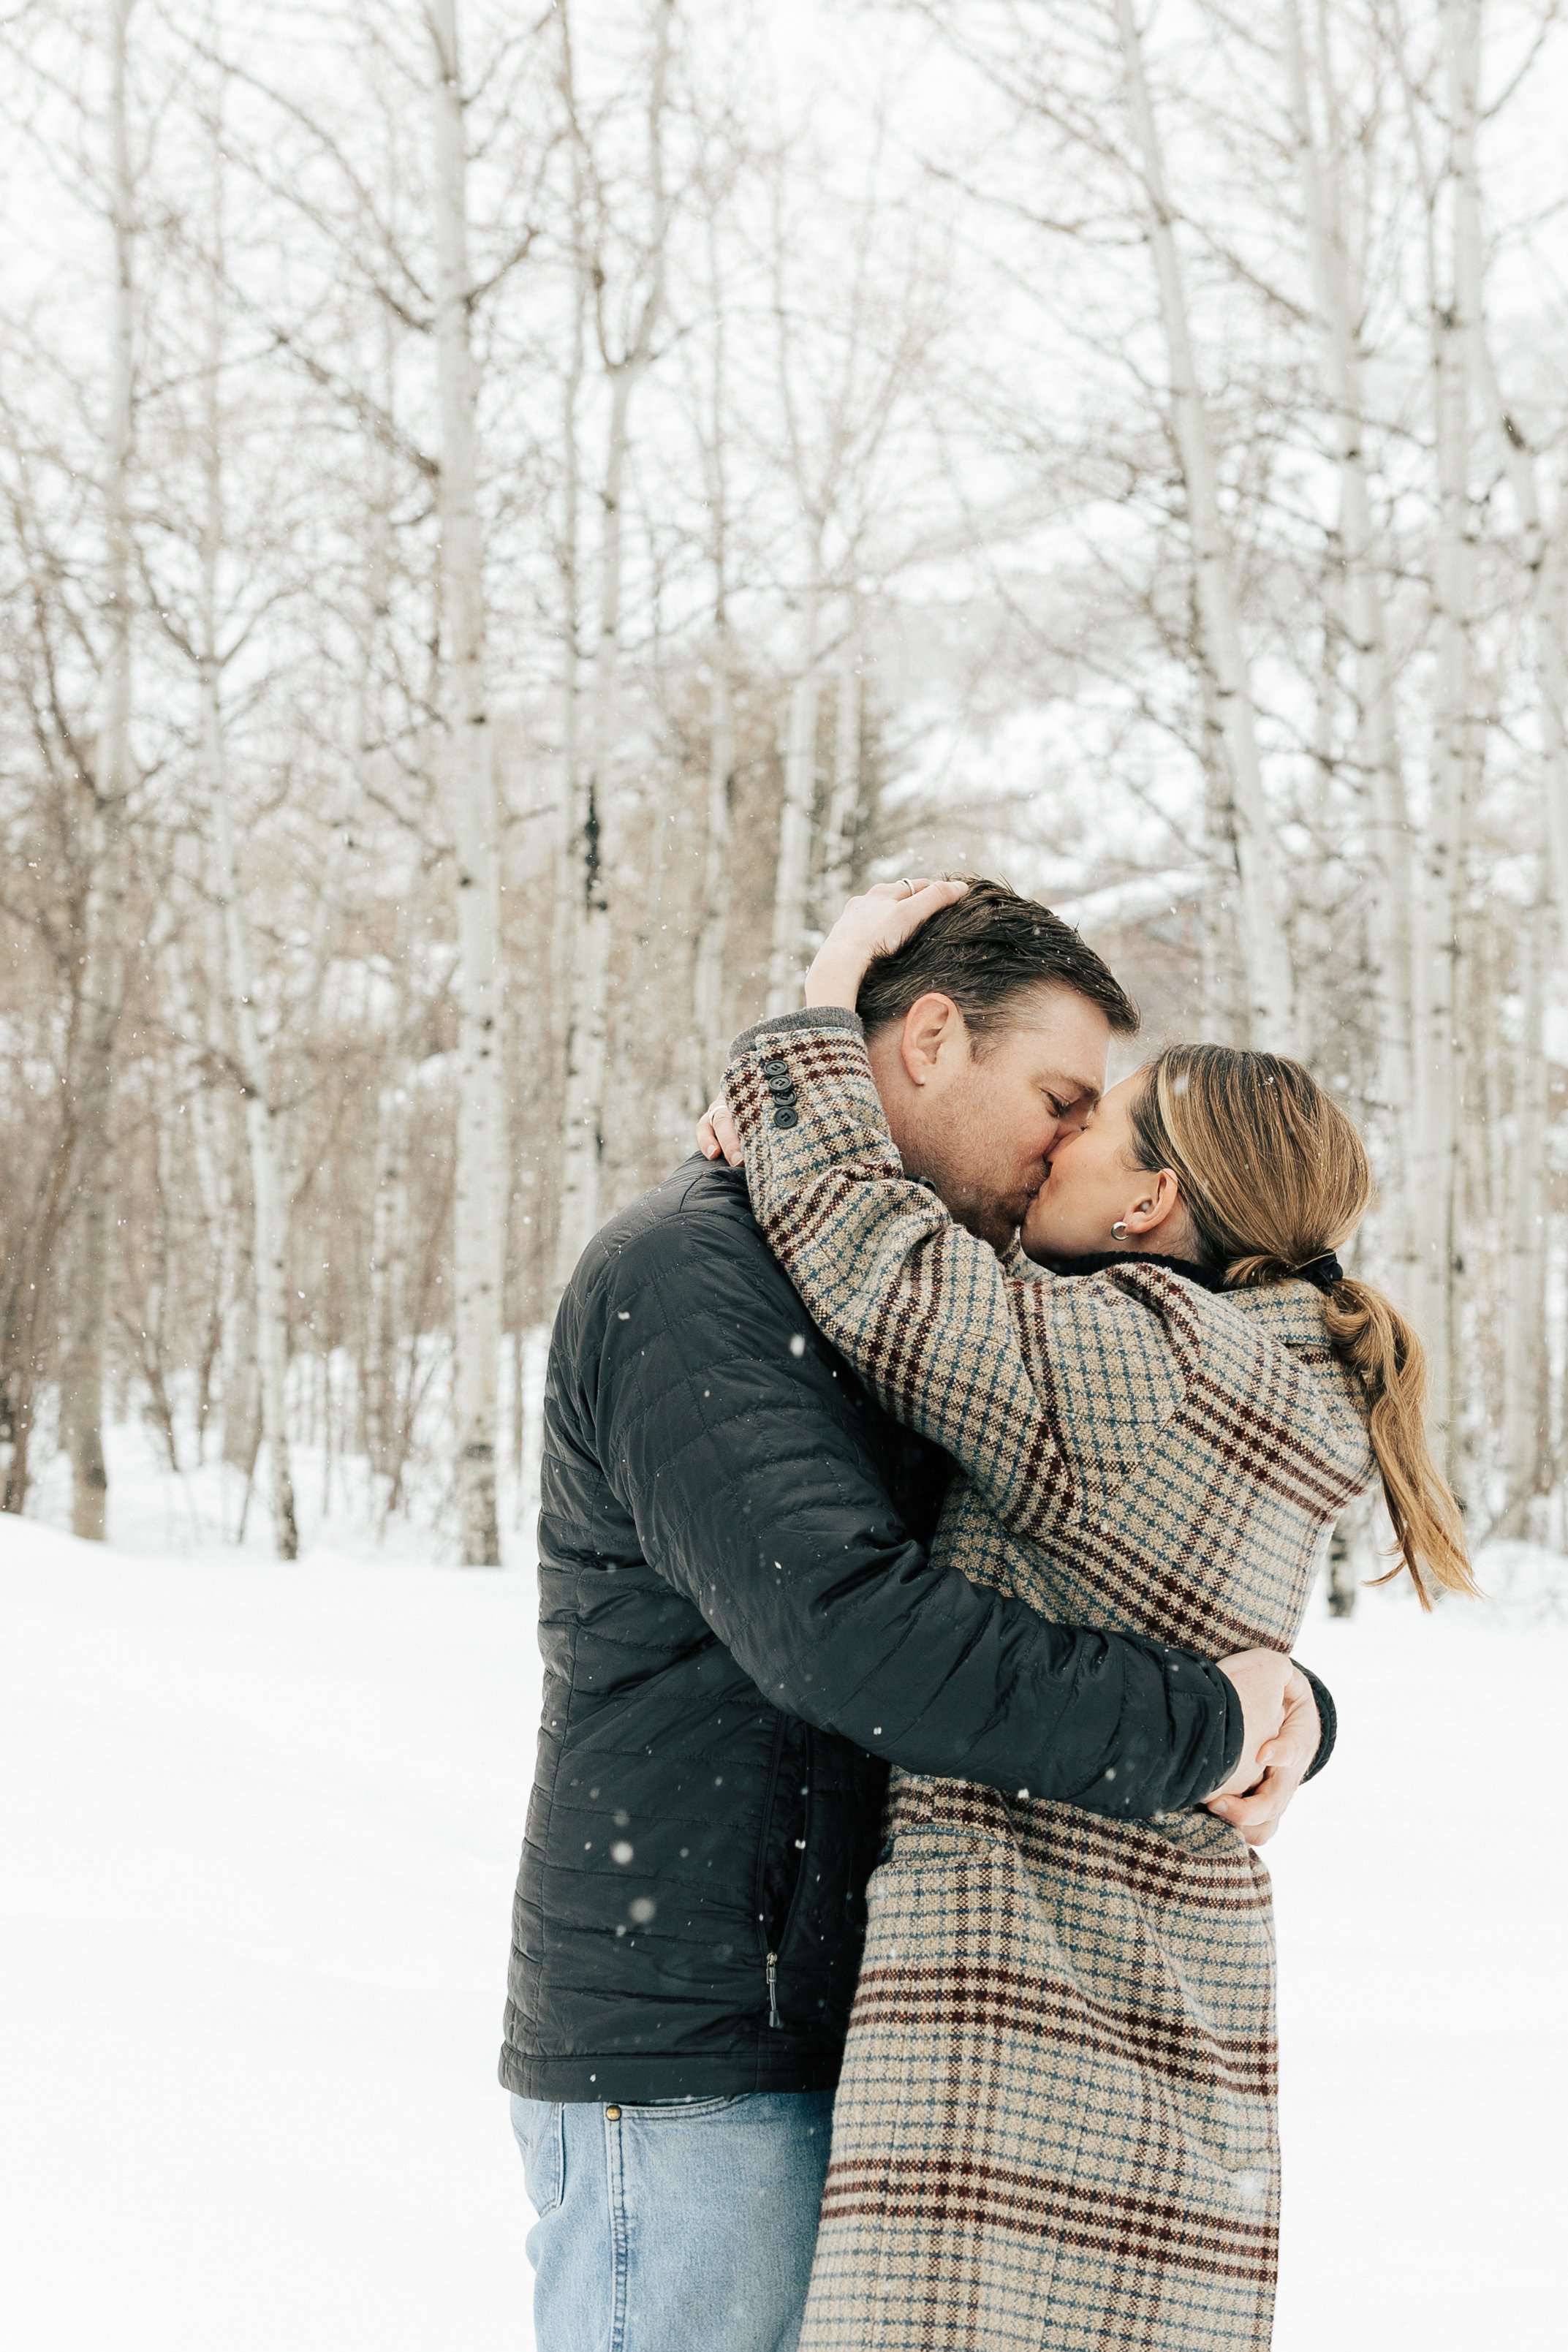  Newly engaged couple kiss. Winter engagement session in Park City, Utah. Boyfriend surprises girlfriend with wedding proposal during a snowy photoshoot. Man proposes to girlfriend. #parkcity #engagements #engagementsessionn #proposal 